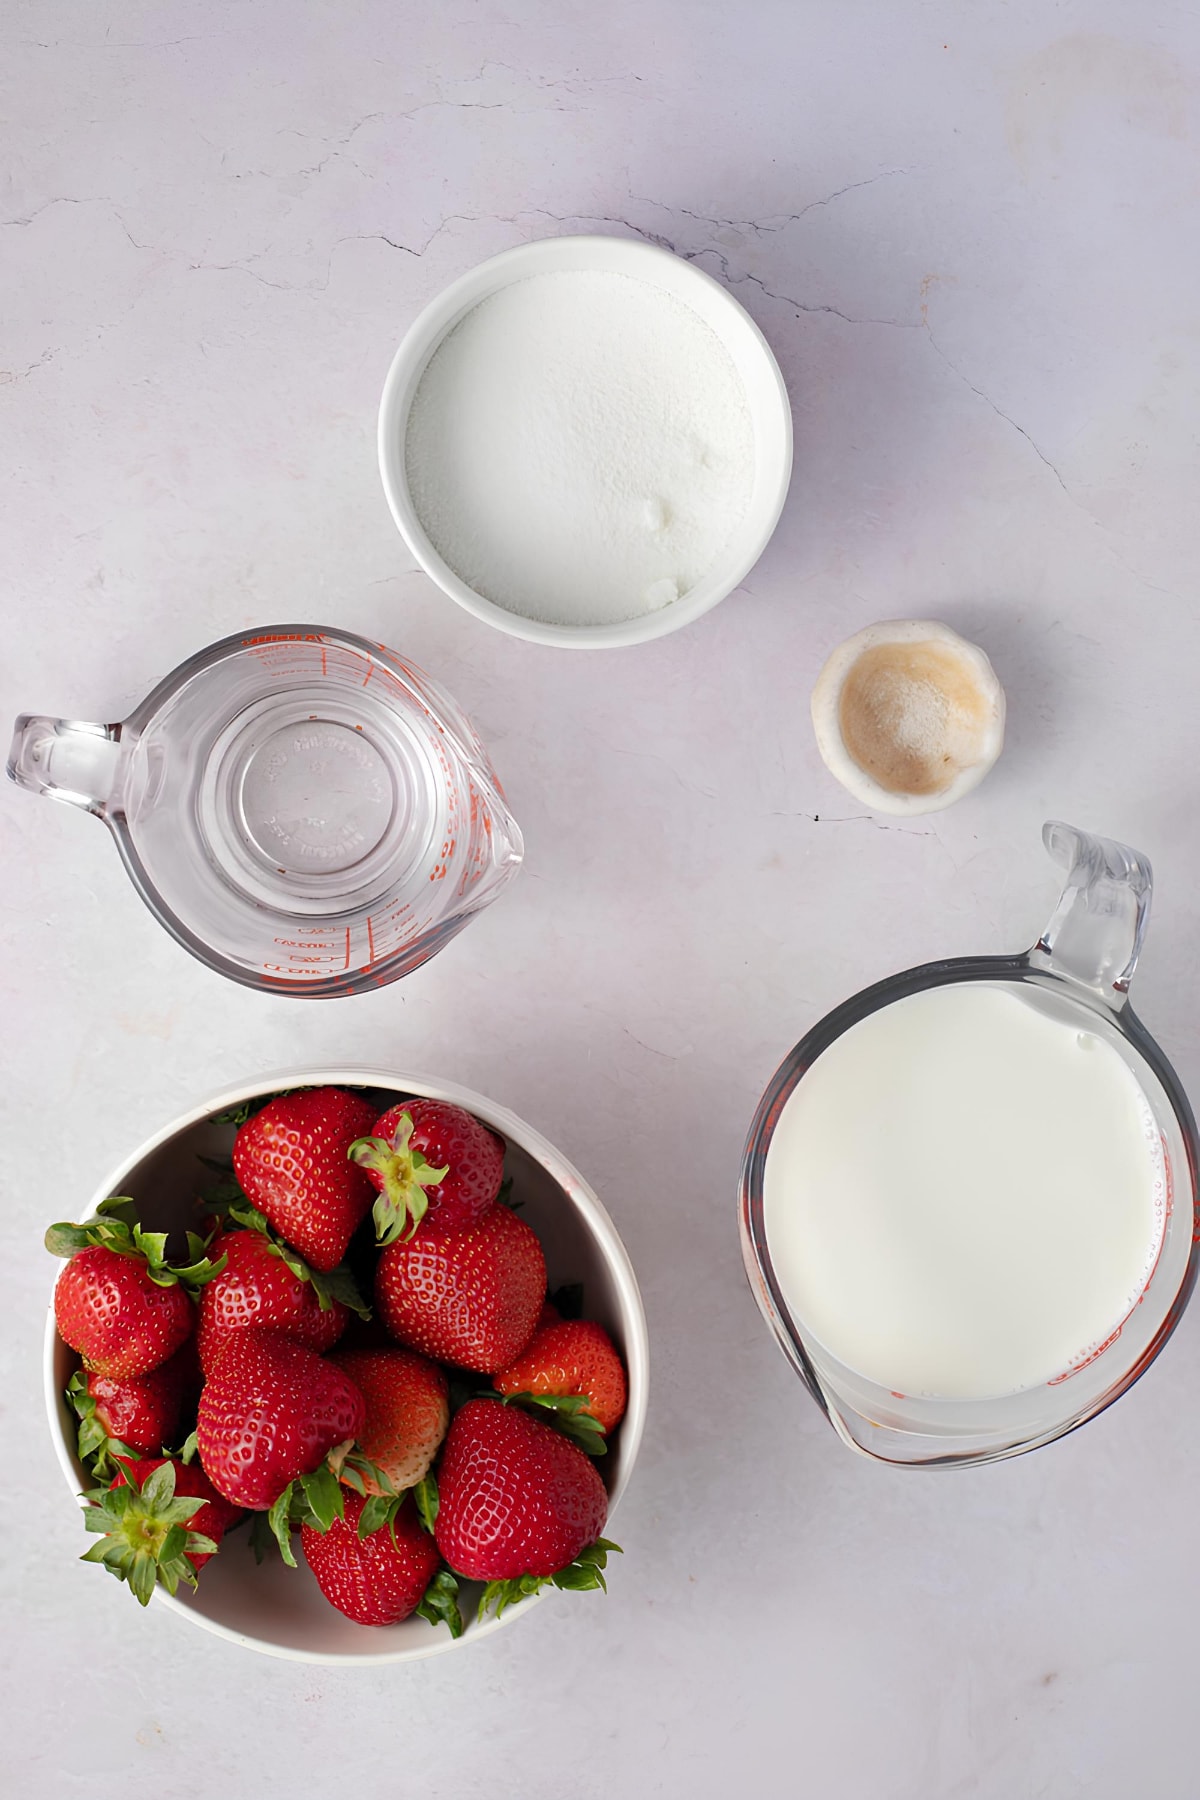 Strawberry milk ingredients on a white table including fresh strawberries, milk, sugar and whipped cream.